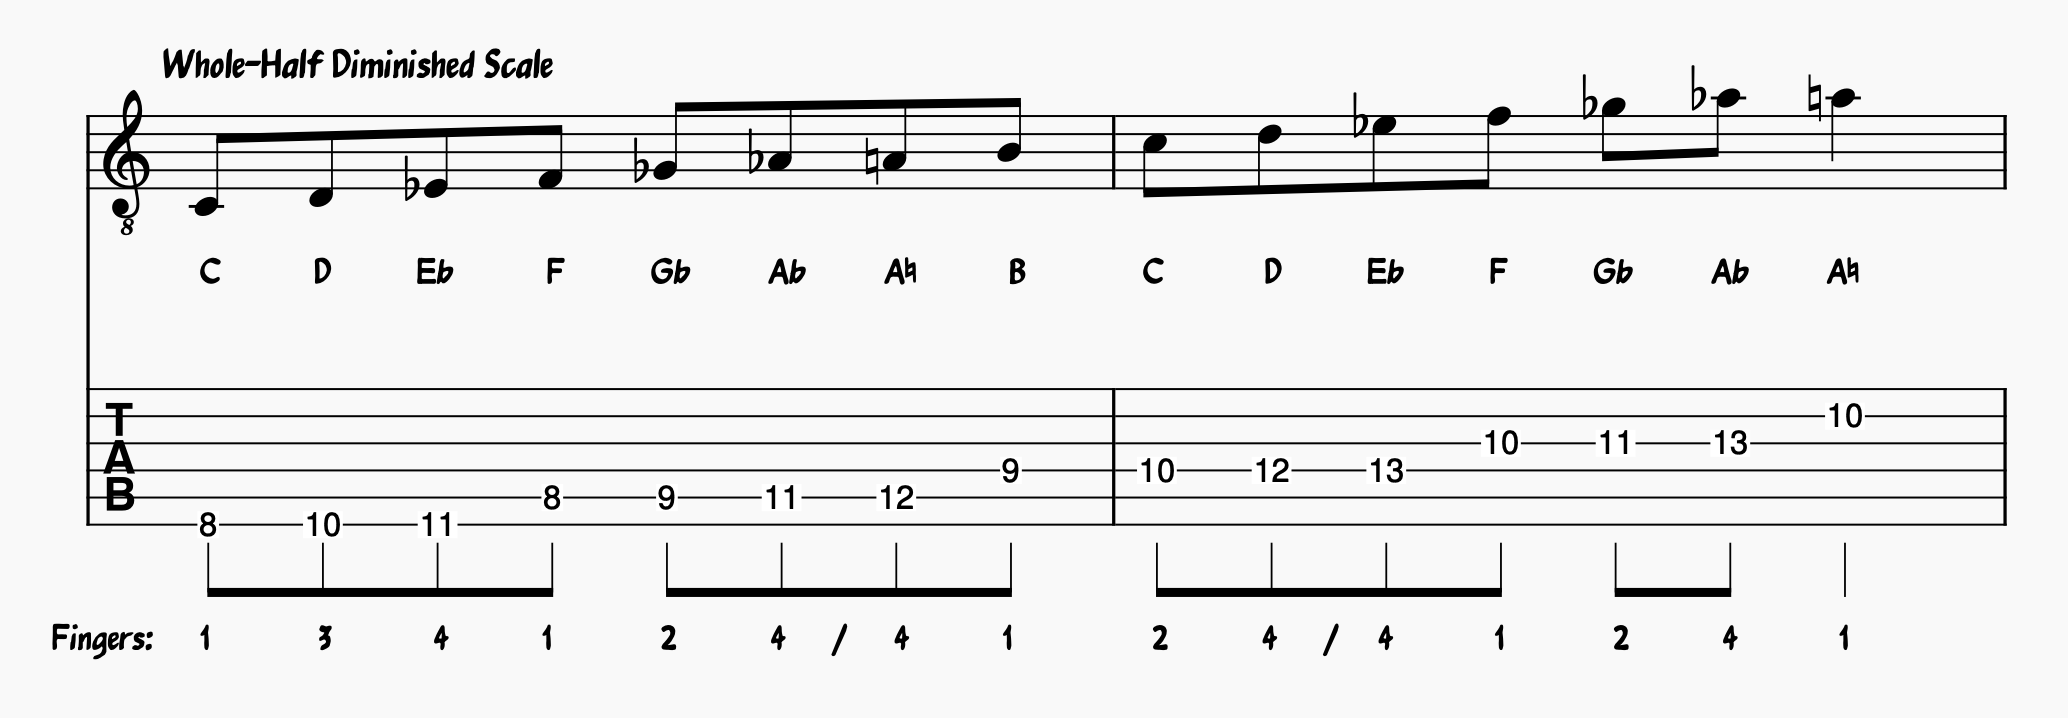 Whole-Hald diminished scale on Guitar